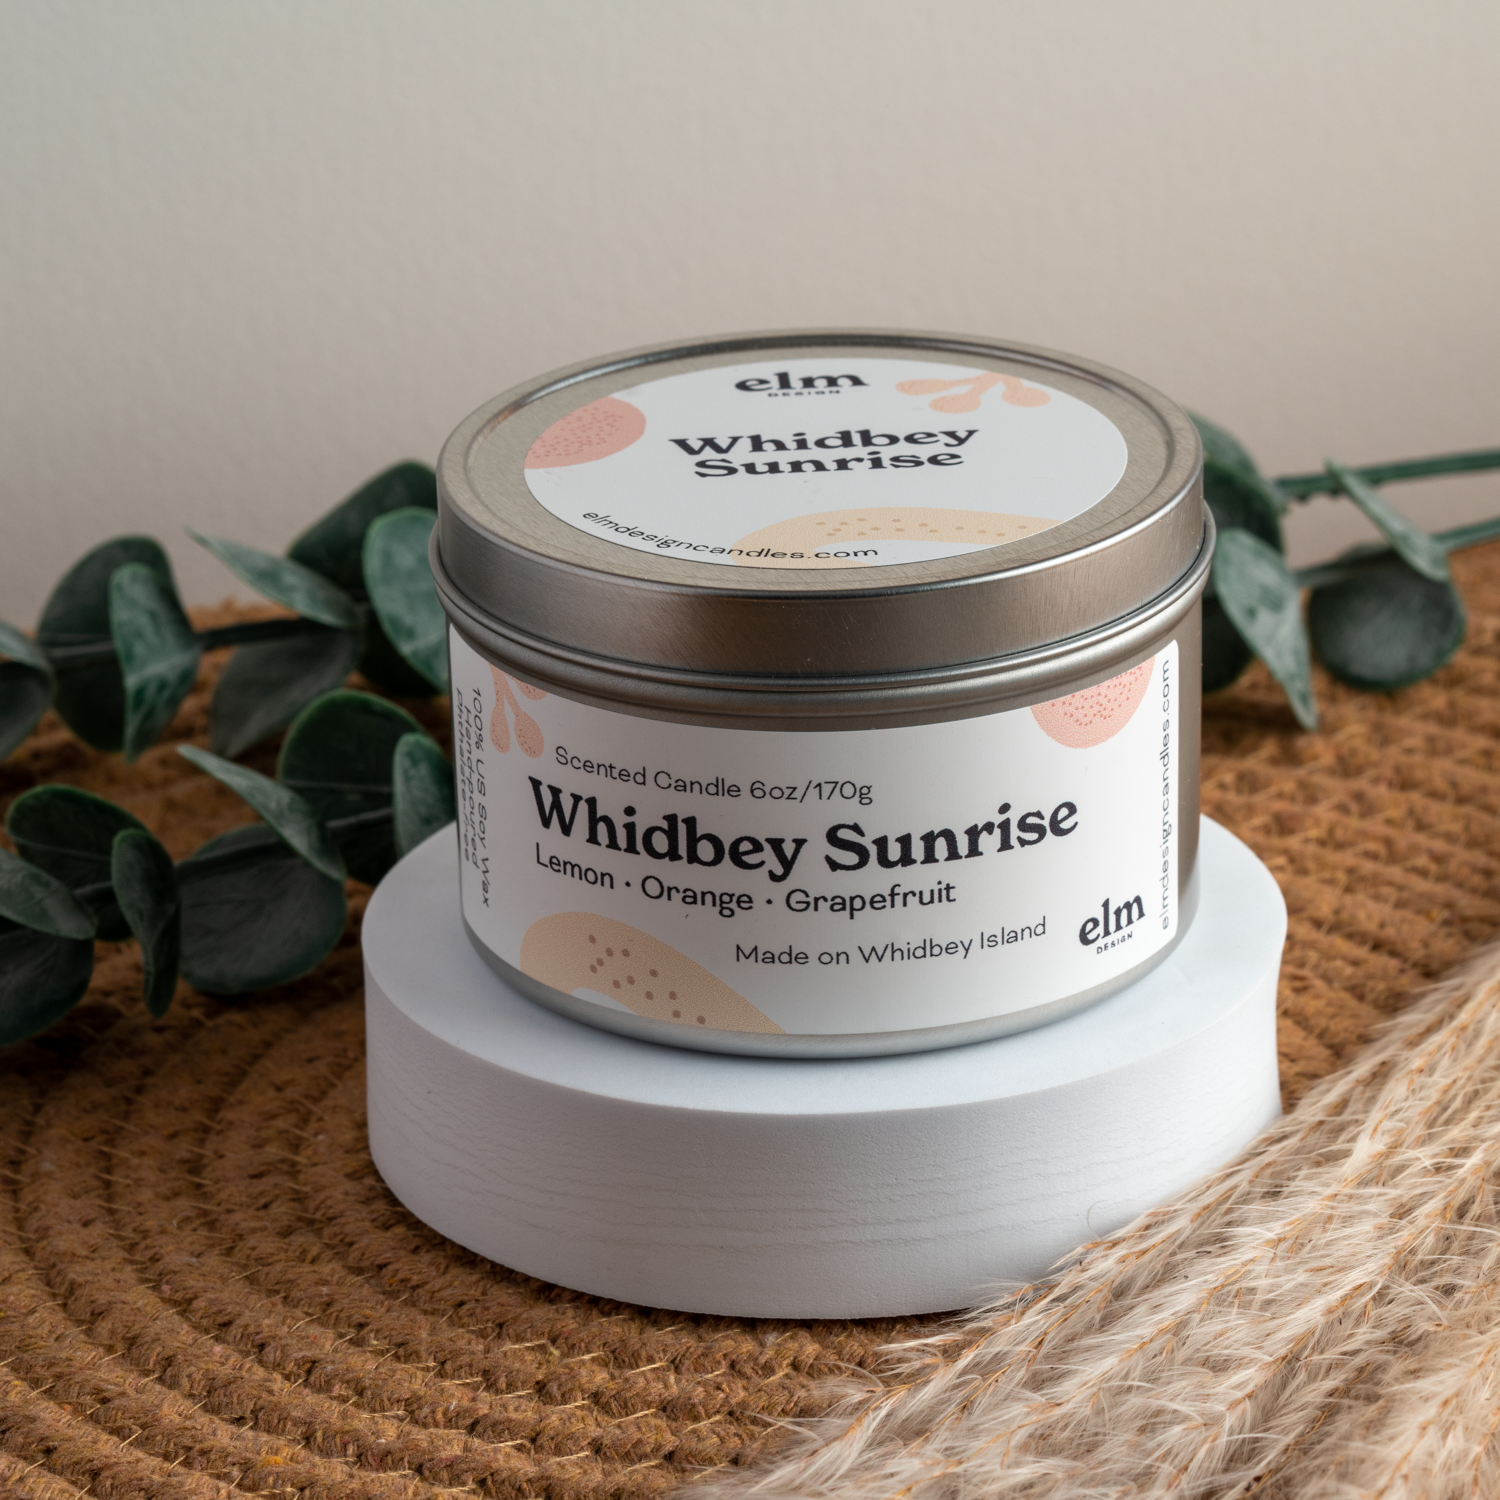 Whidbey Sunrise scented soy candle in colorfully labeled 6 oz container.